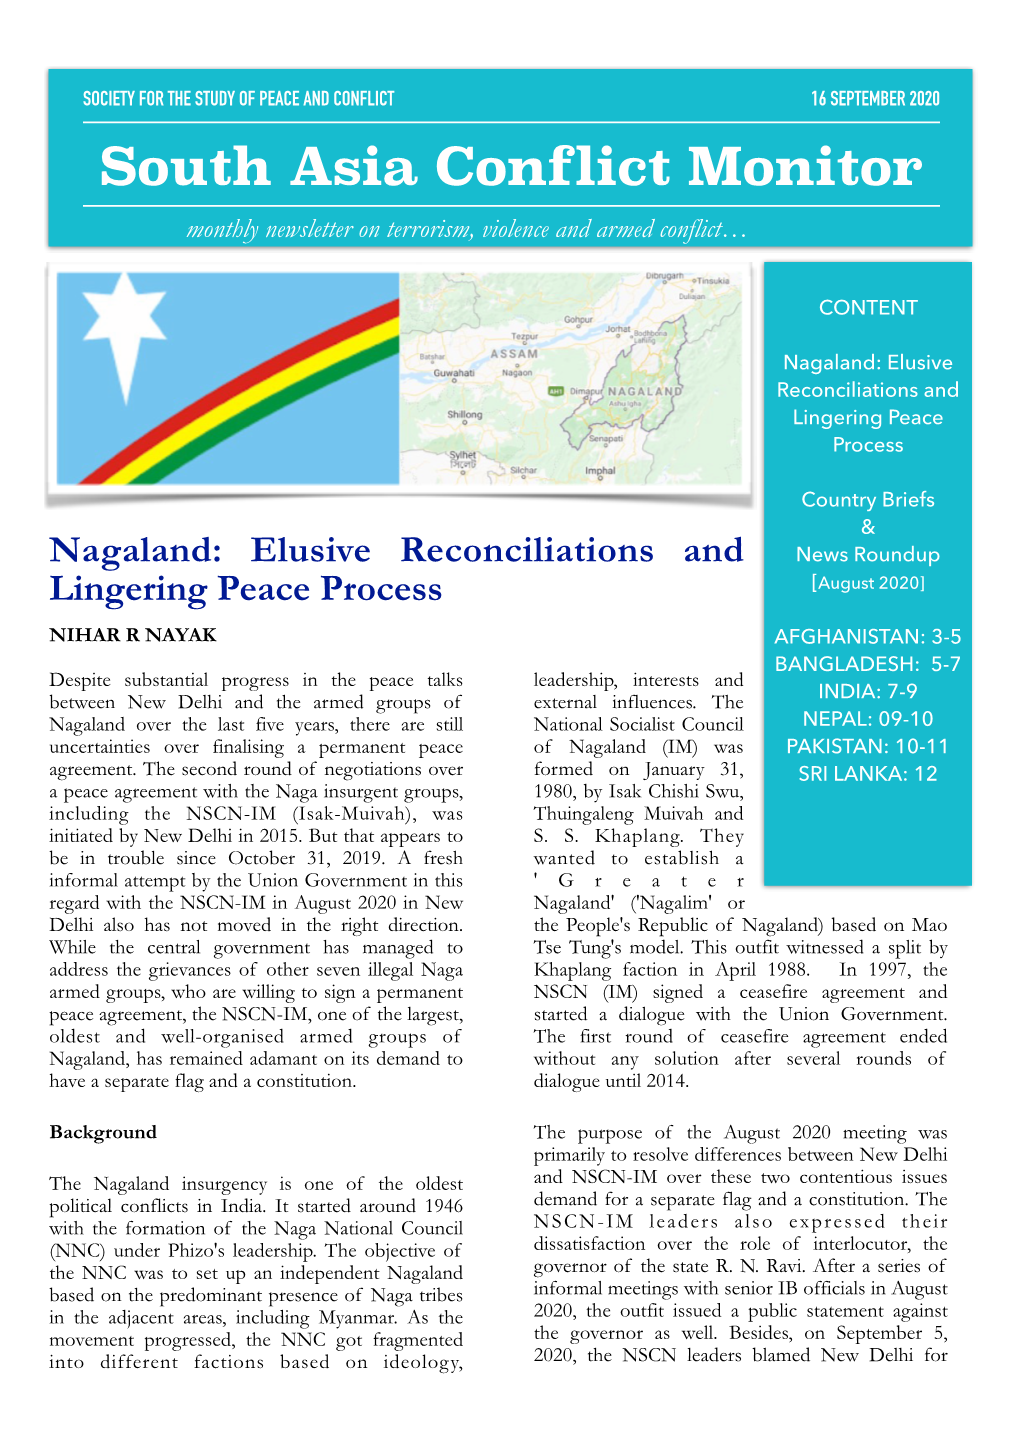 Nagaland: Elusive Reconciliations and Lingering Peace Process